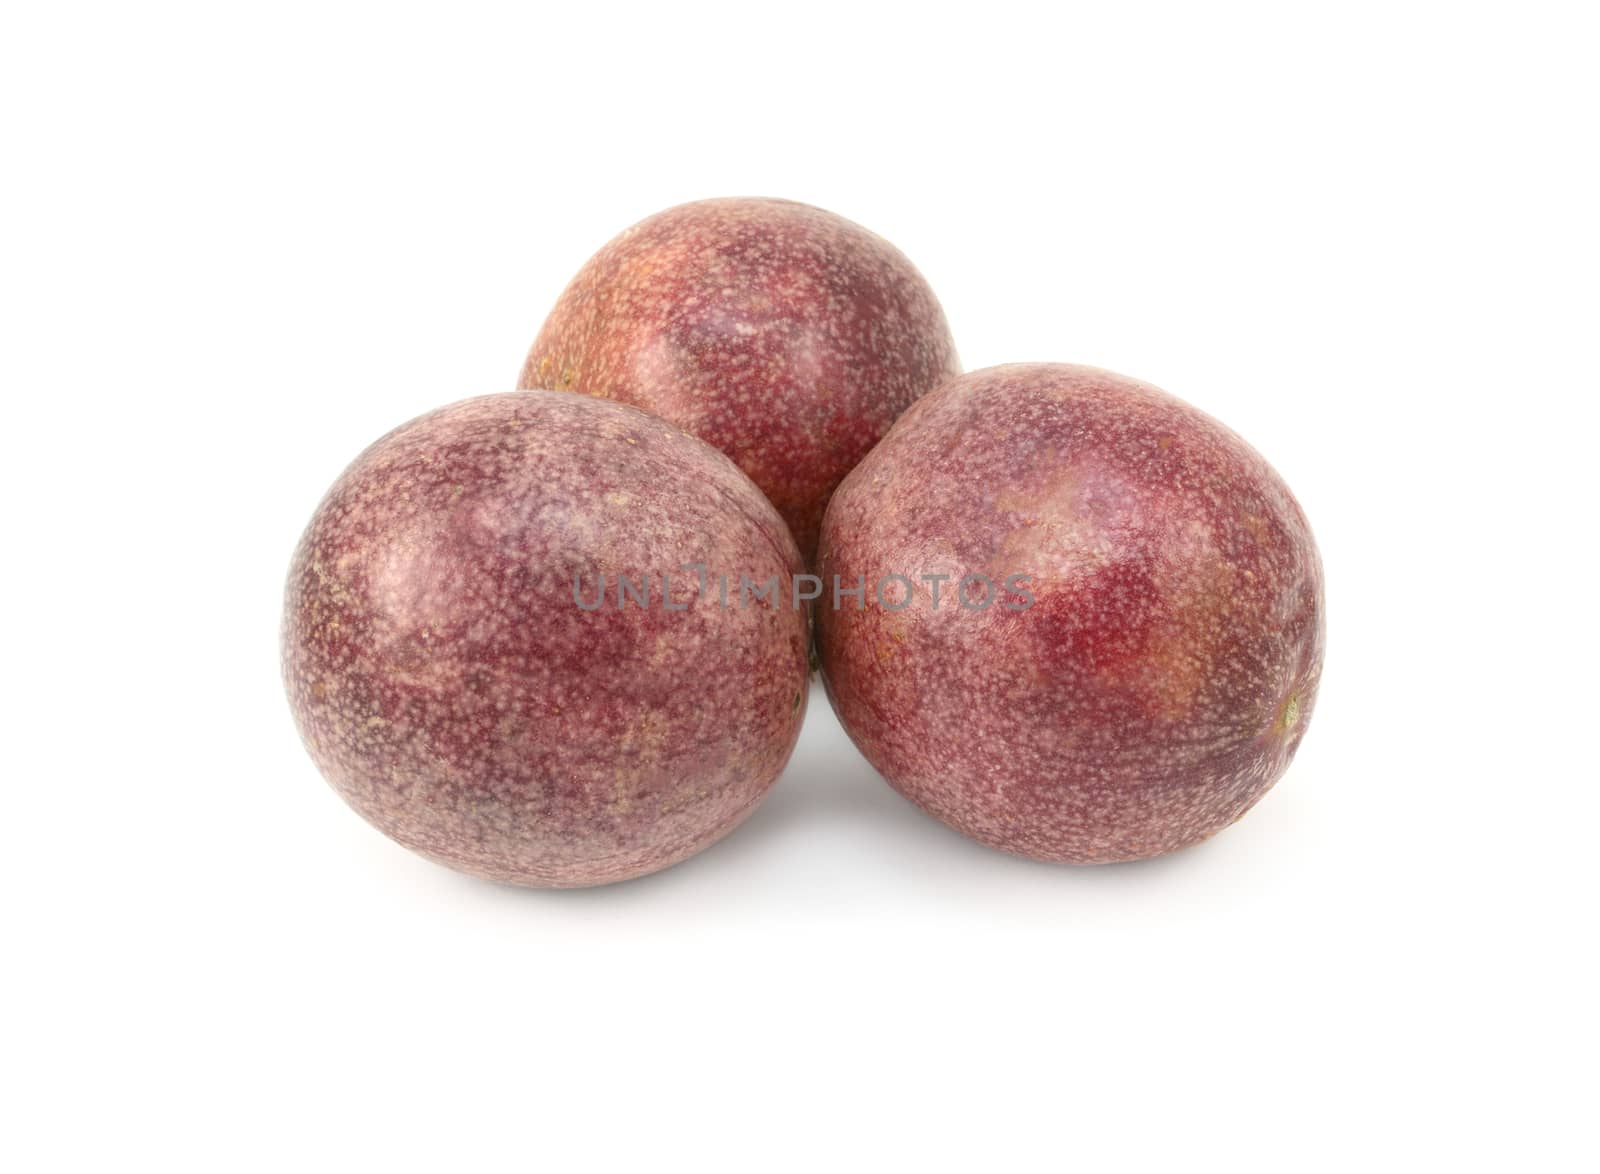 Three whole passion fruits with speckled purple skins by sarahdoow